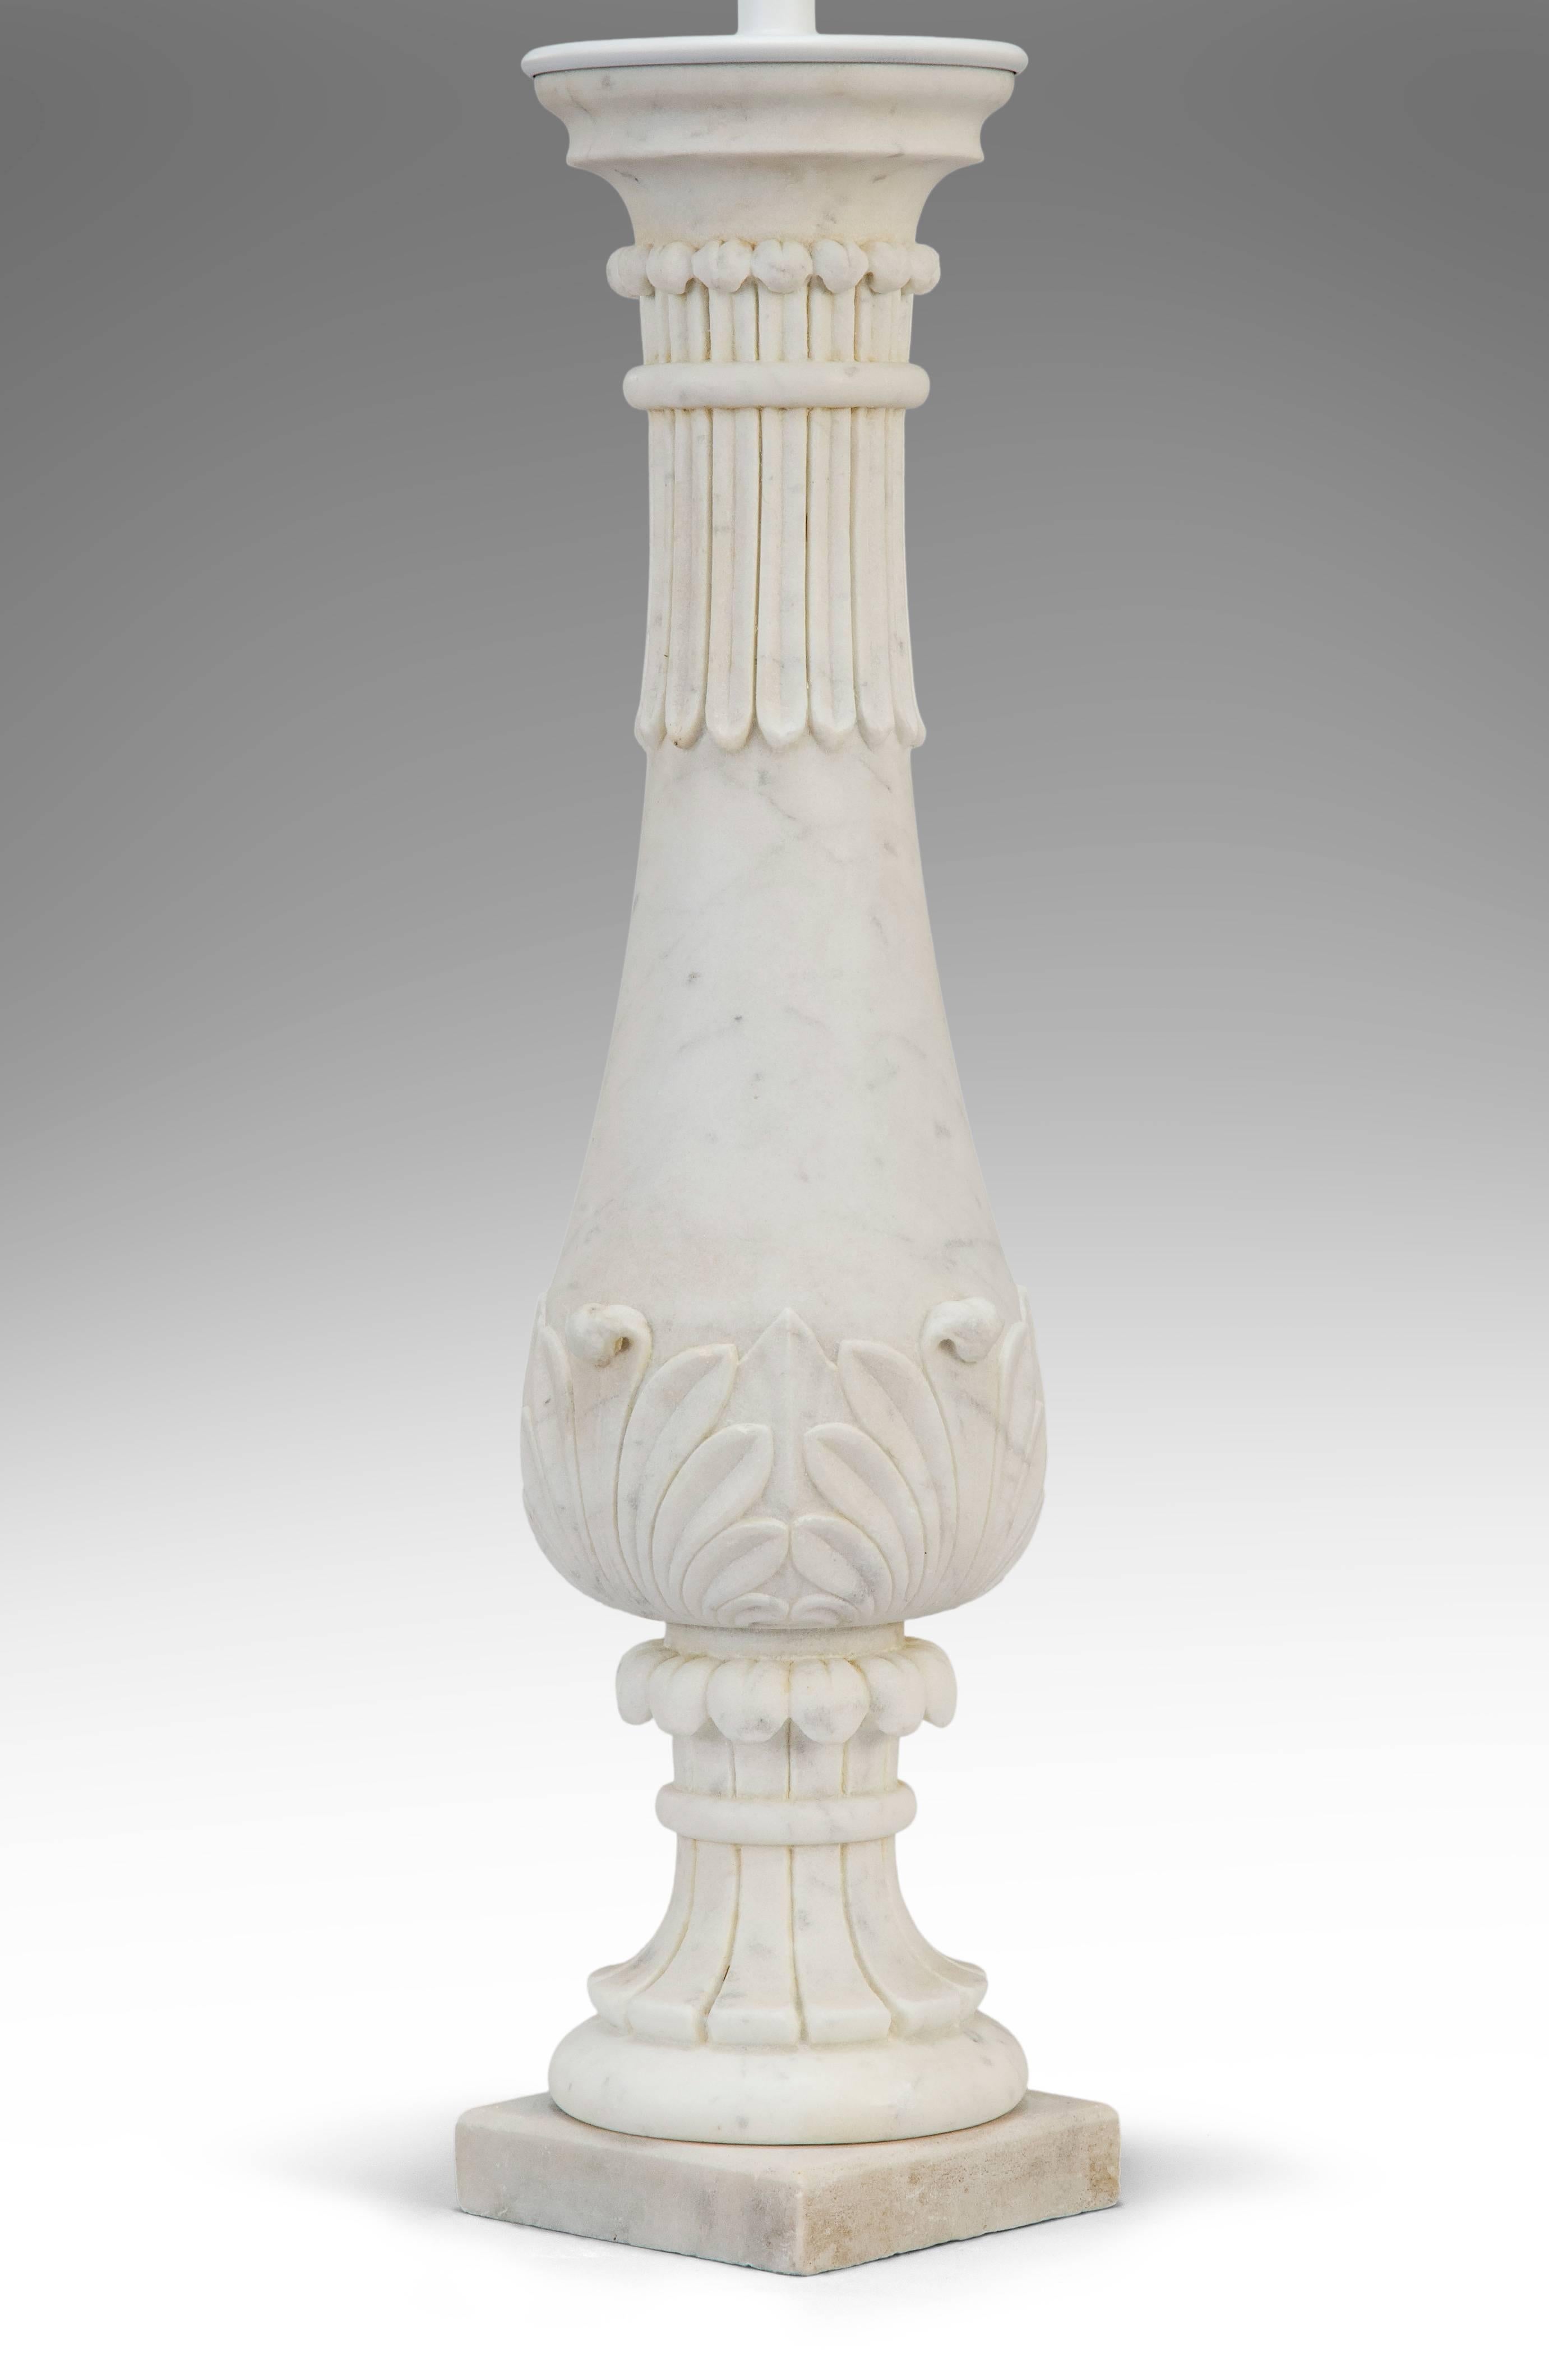 Pair of carved marble baluster lamps
19th century.
A really beautiful pair of gracefully carved marble lamps ready to light up your life.
Another pair of marble lamps available.

 